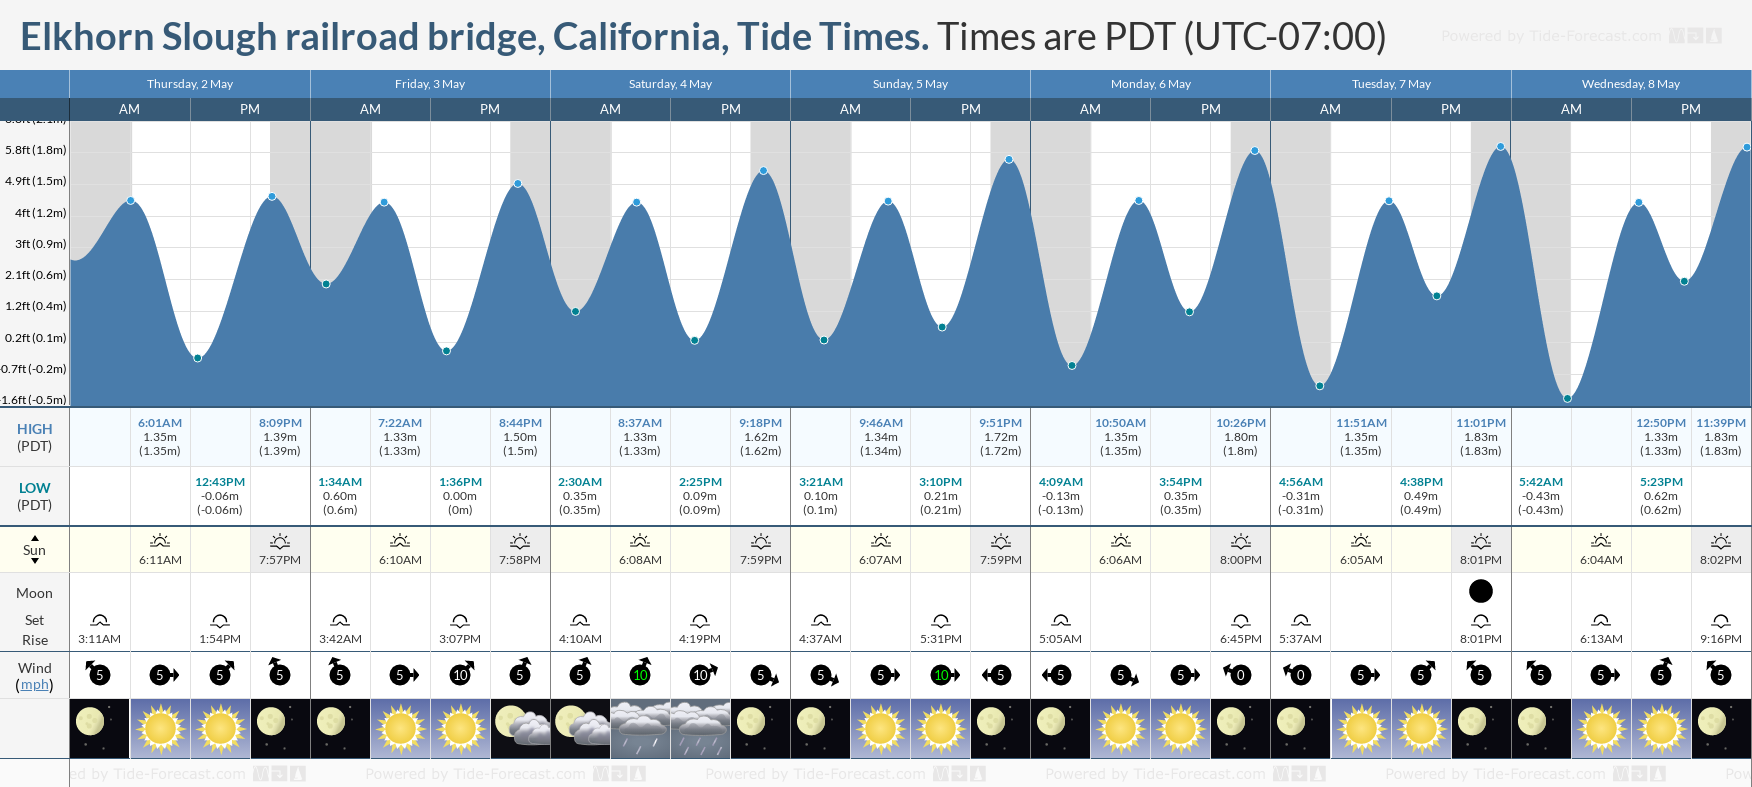 Elkhorn Slough railroad bridge, California Tide Chart including high and low tide times for the next 7 days